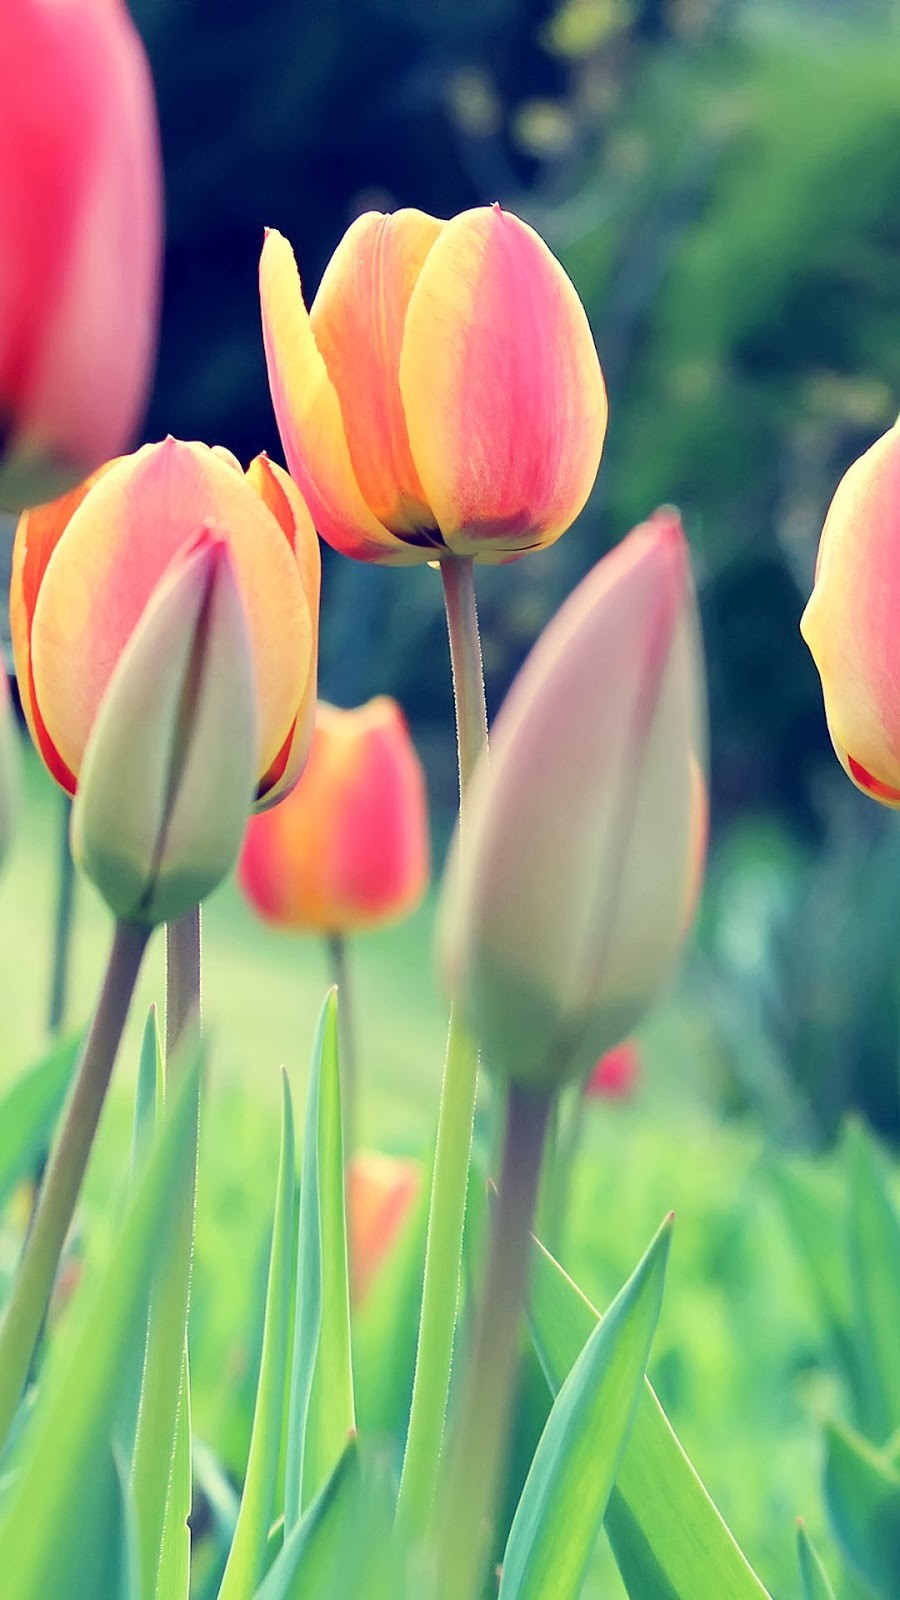 android central wallpaper gallery,flower,flowering plant,petal,tulip,plant